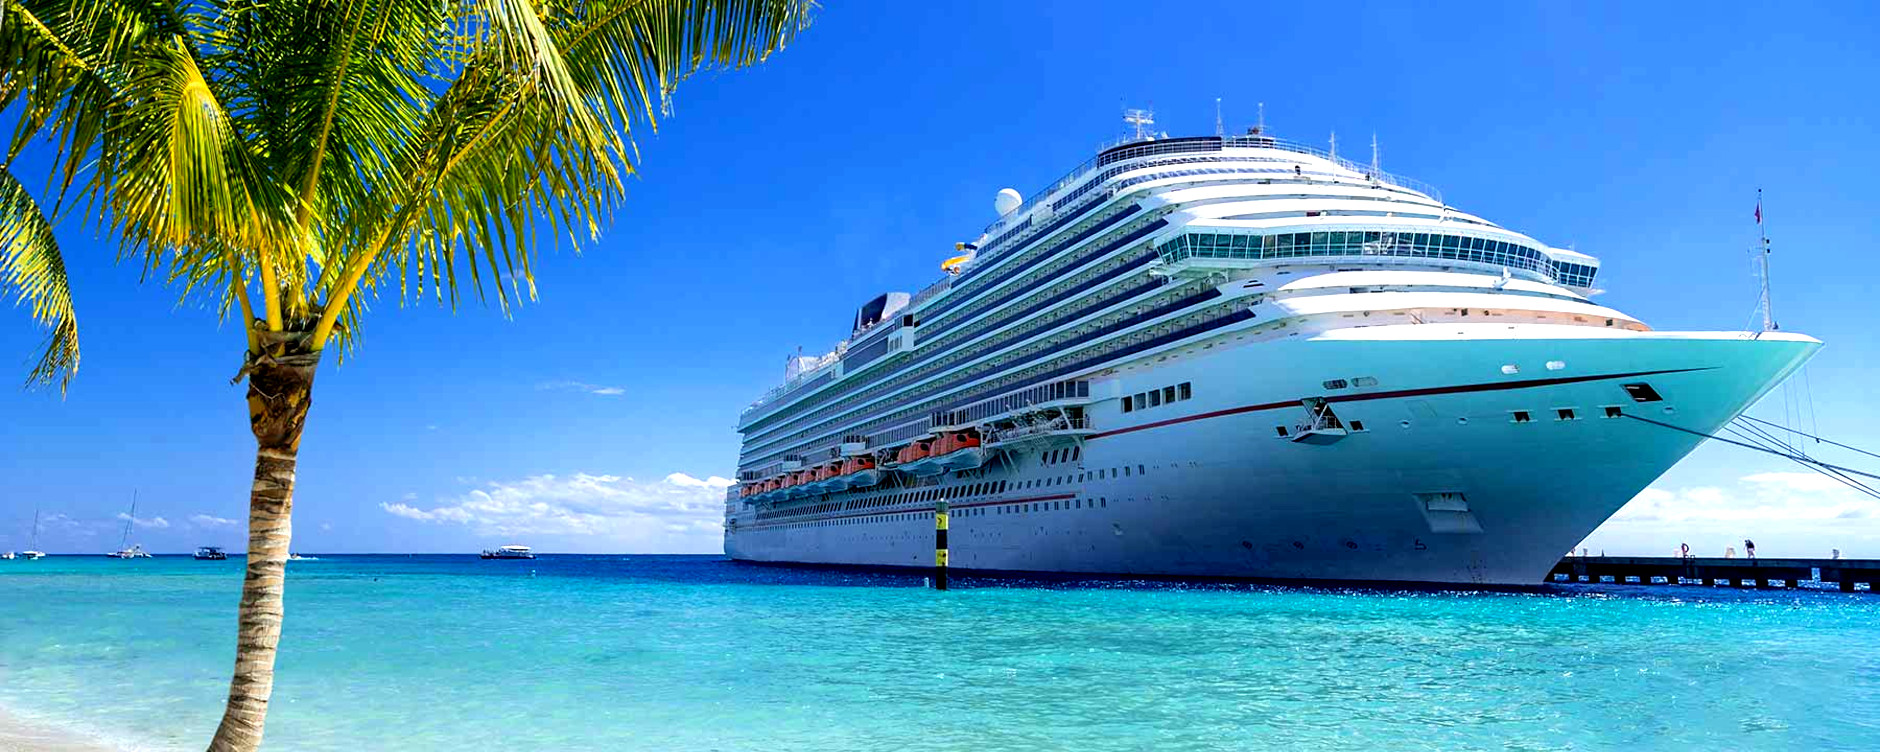 Cruise ship docked at tropical port on sunny day